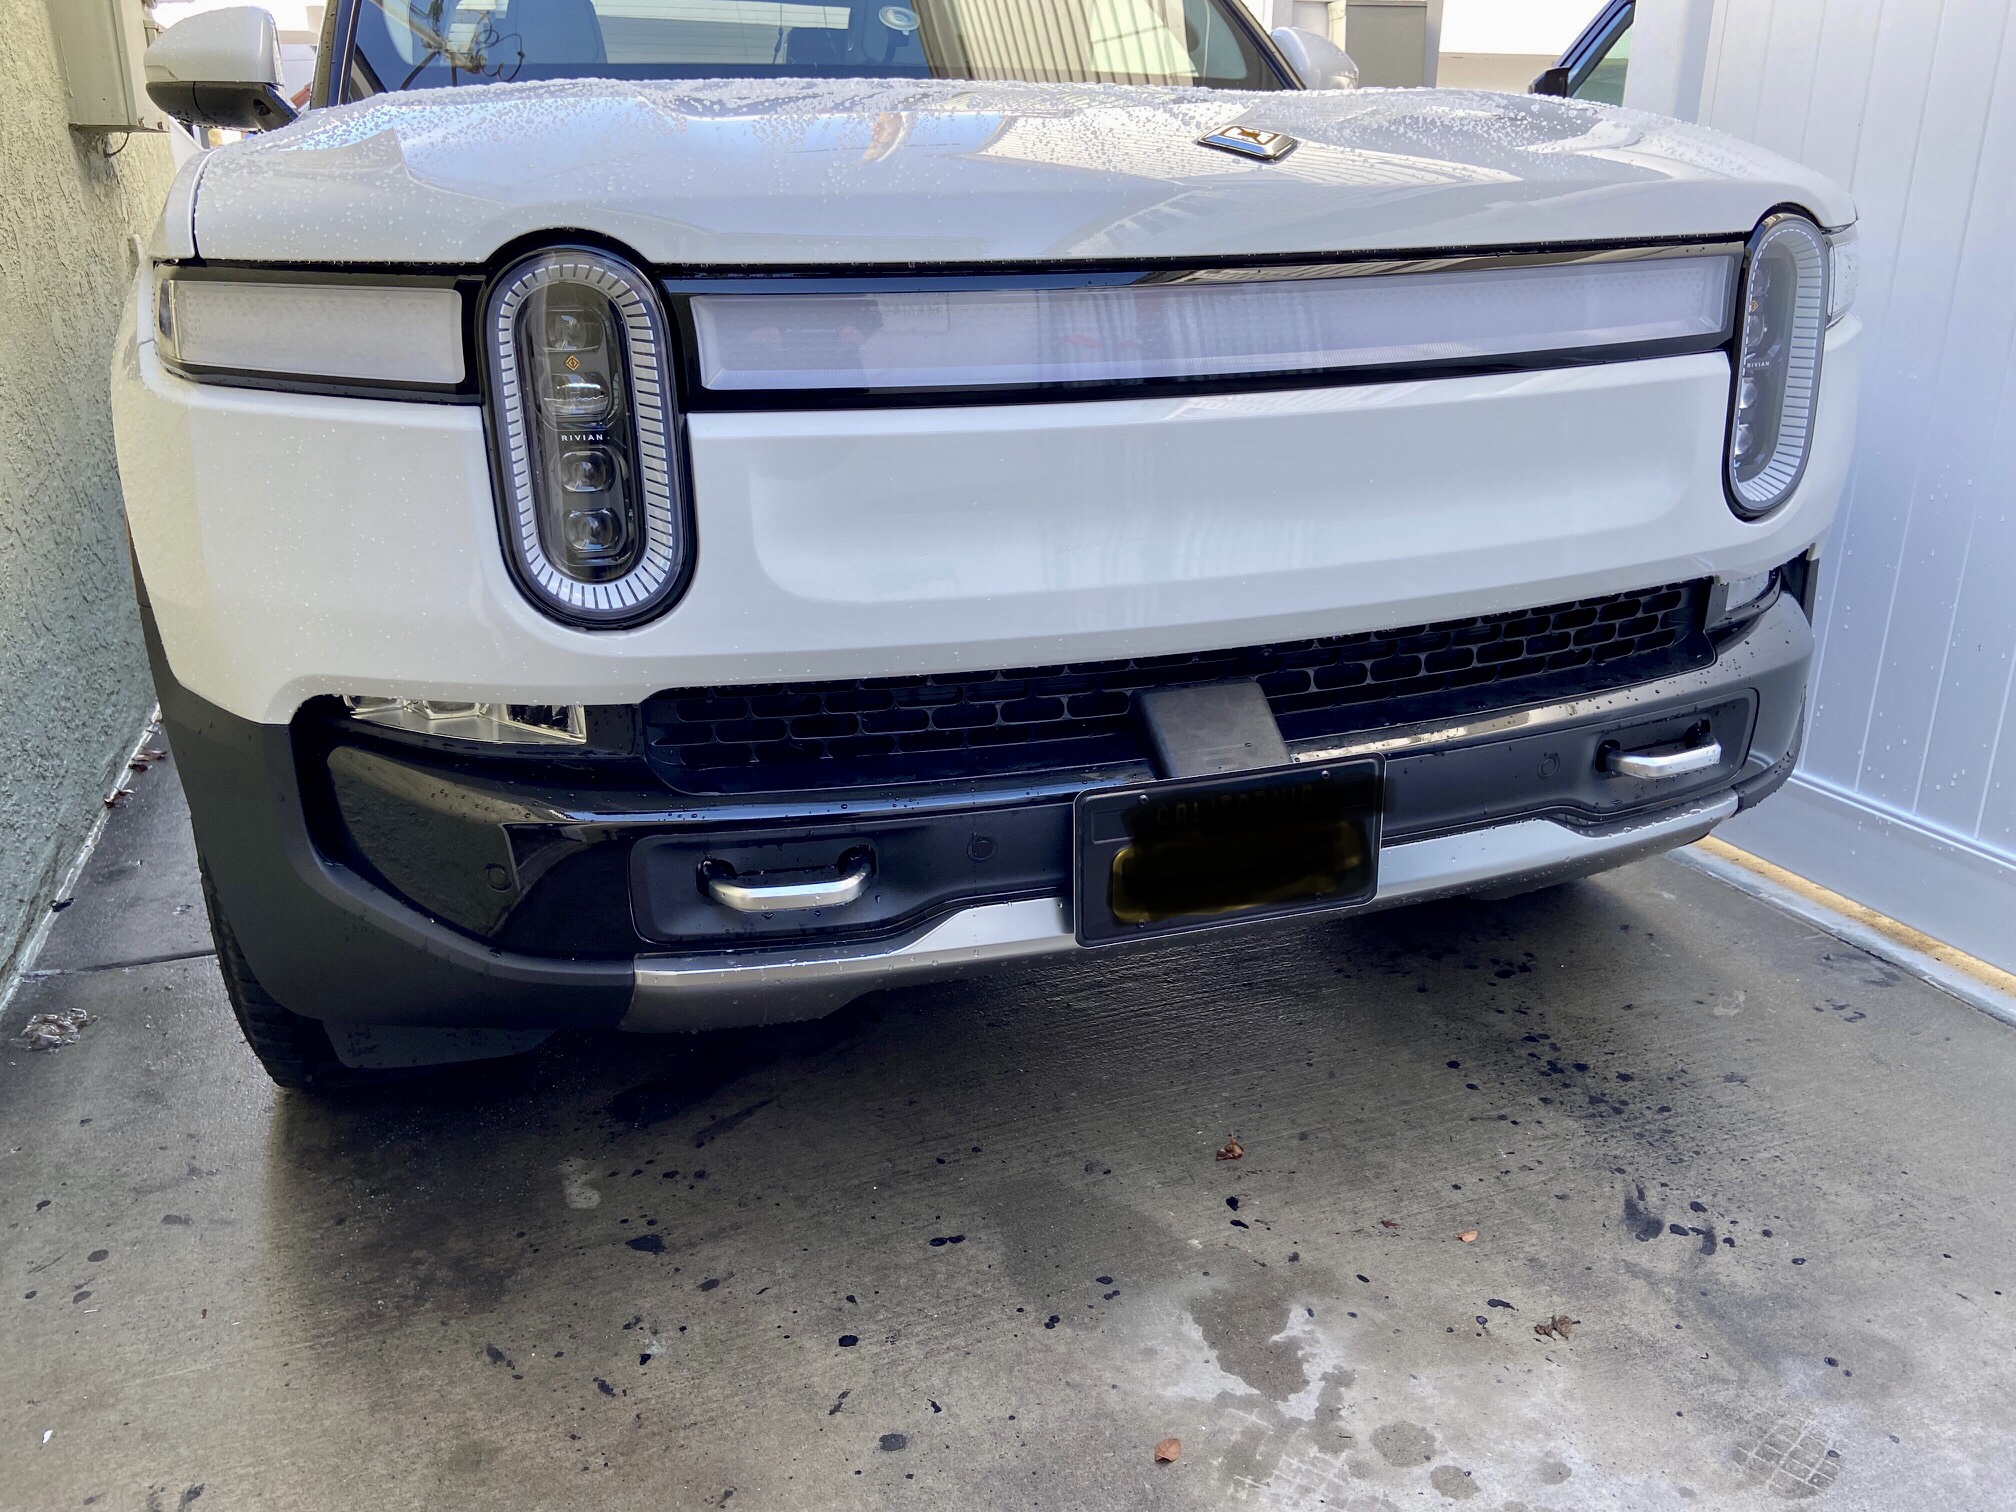 Rivian R1T R1S Front License Plate Mount that looks good and high quality? 792E0D7D-8E08-4008-B58B-74E3345E0020